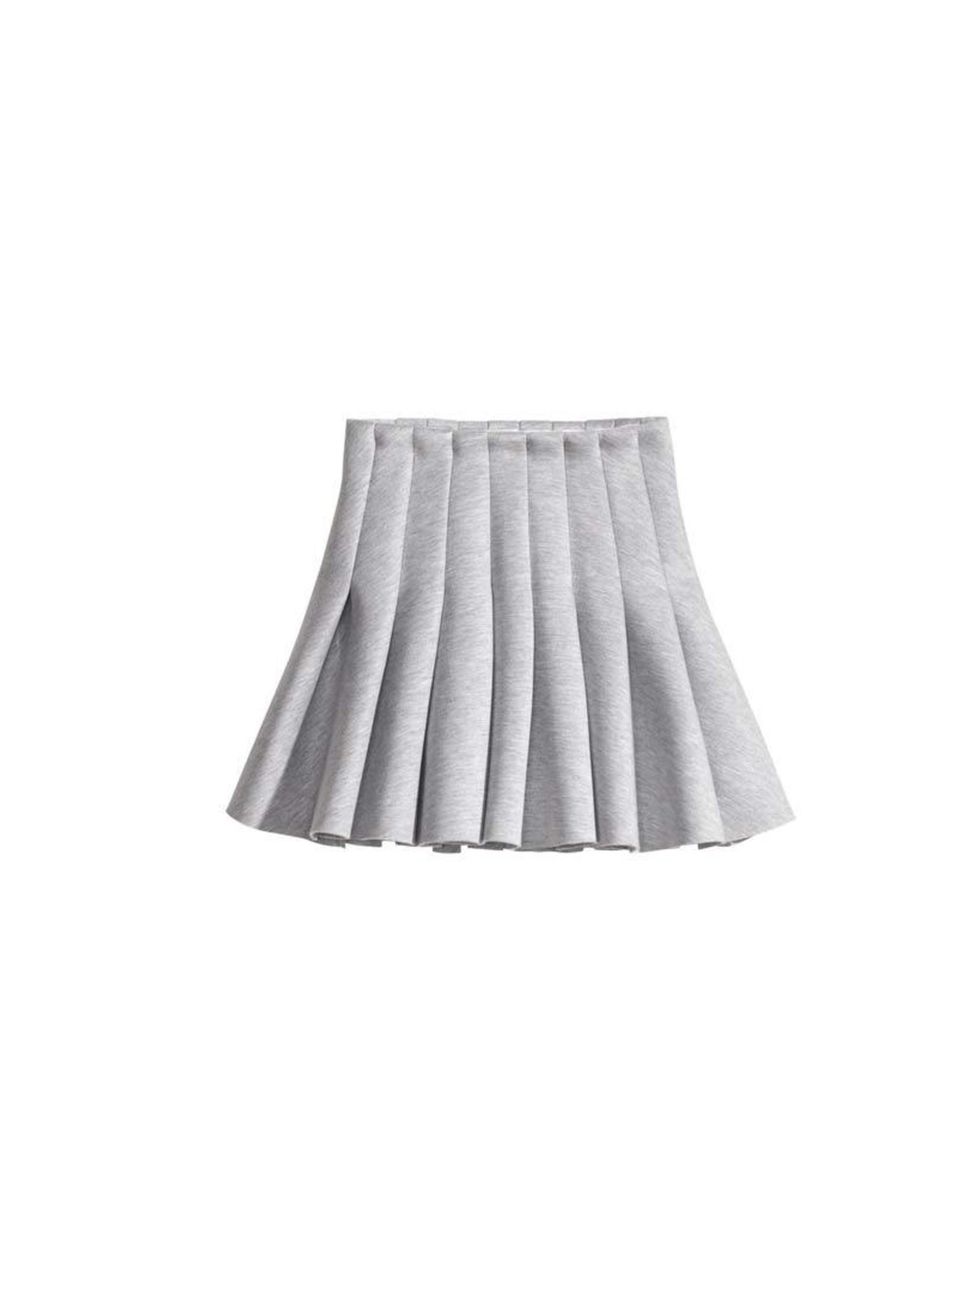 <p>Flared cotton skirt from <a href="http://www.hm.com/gb/product/21993?article=21993-C">H&amp;M</a>, £10</p>